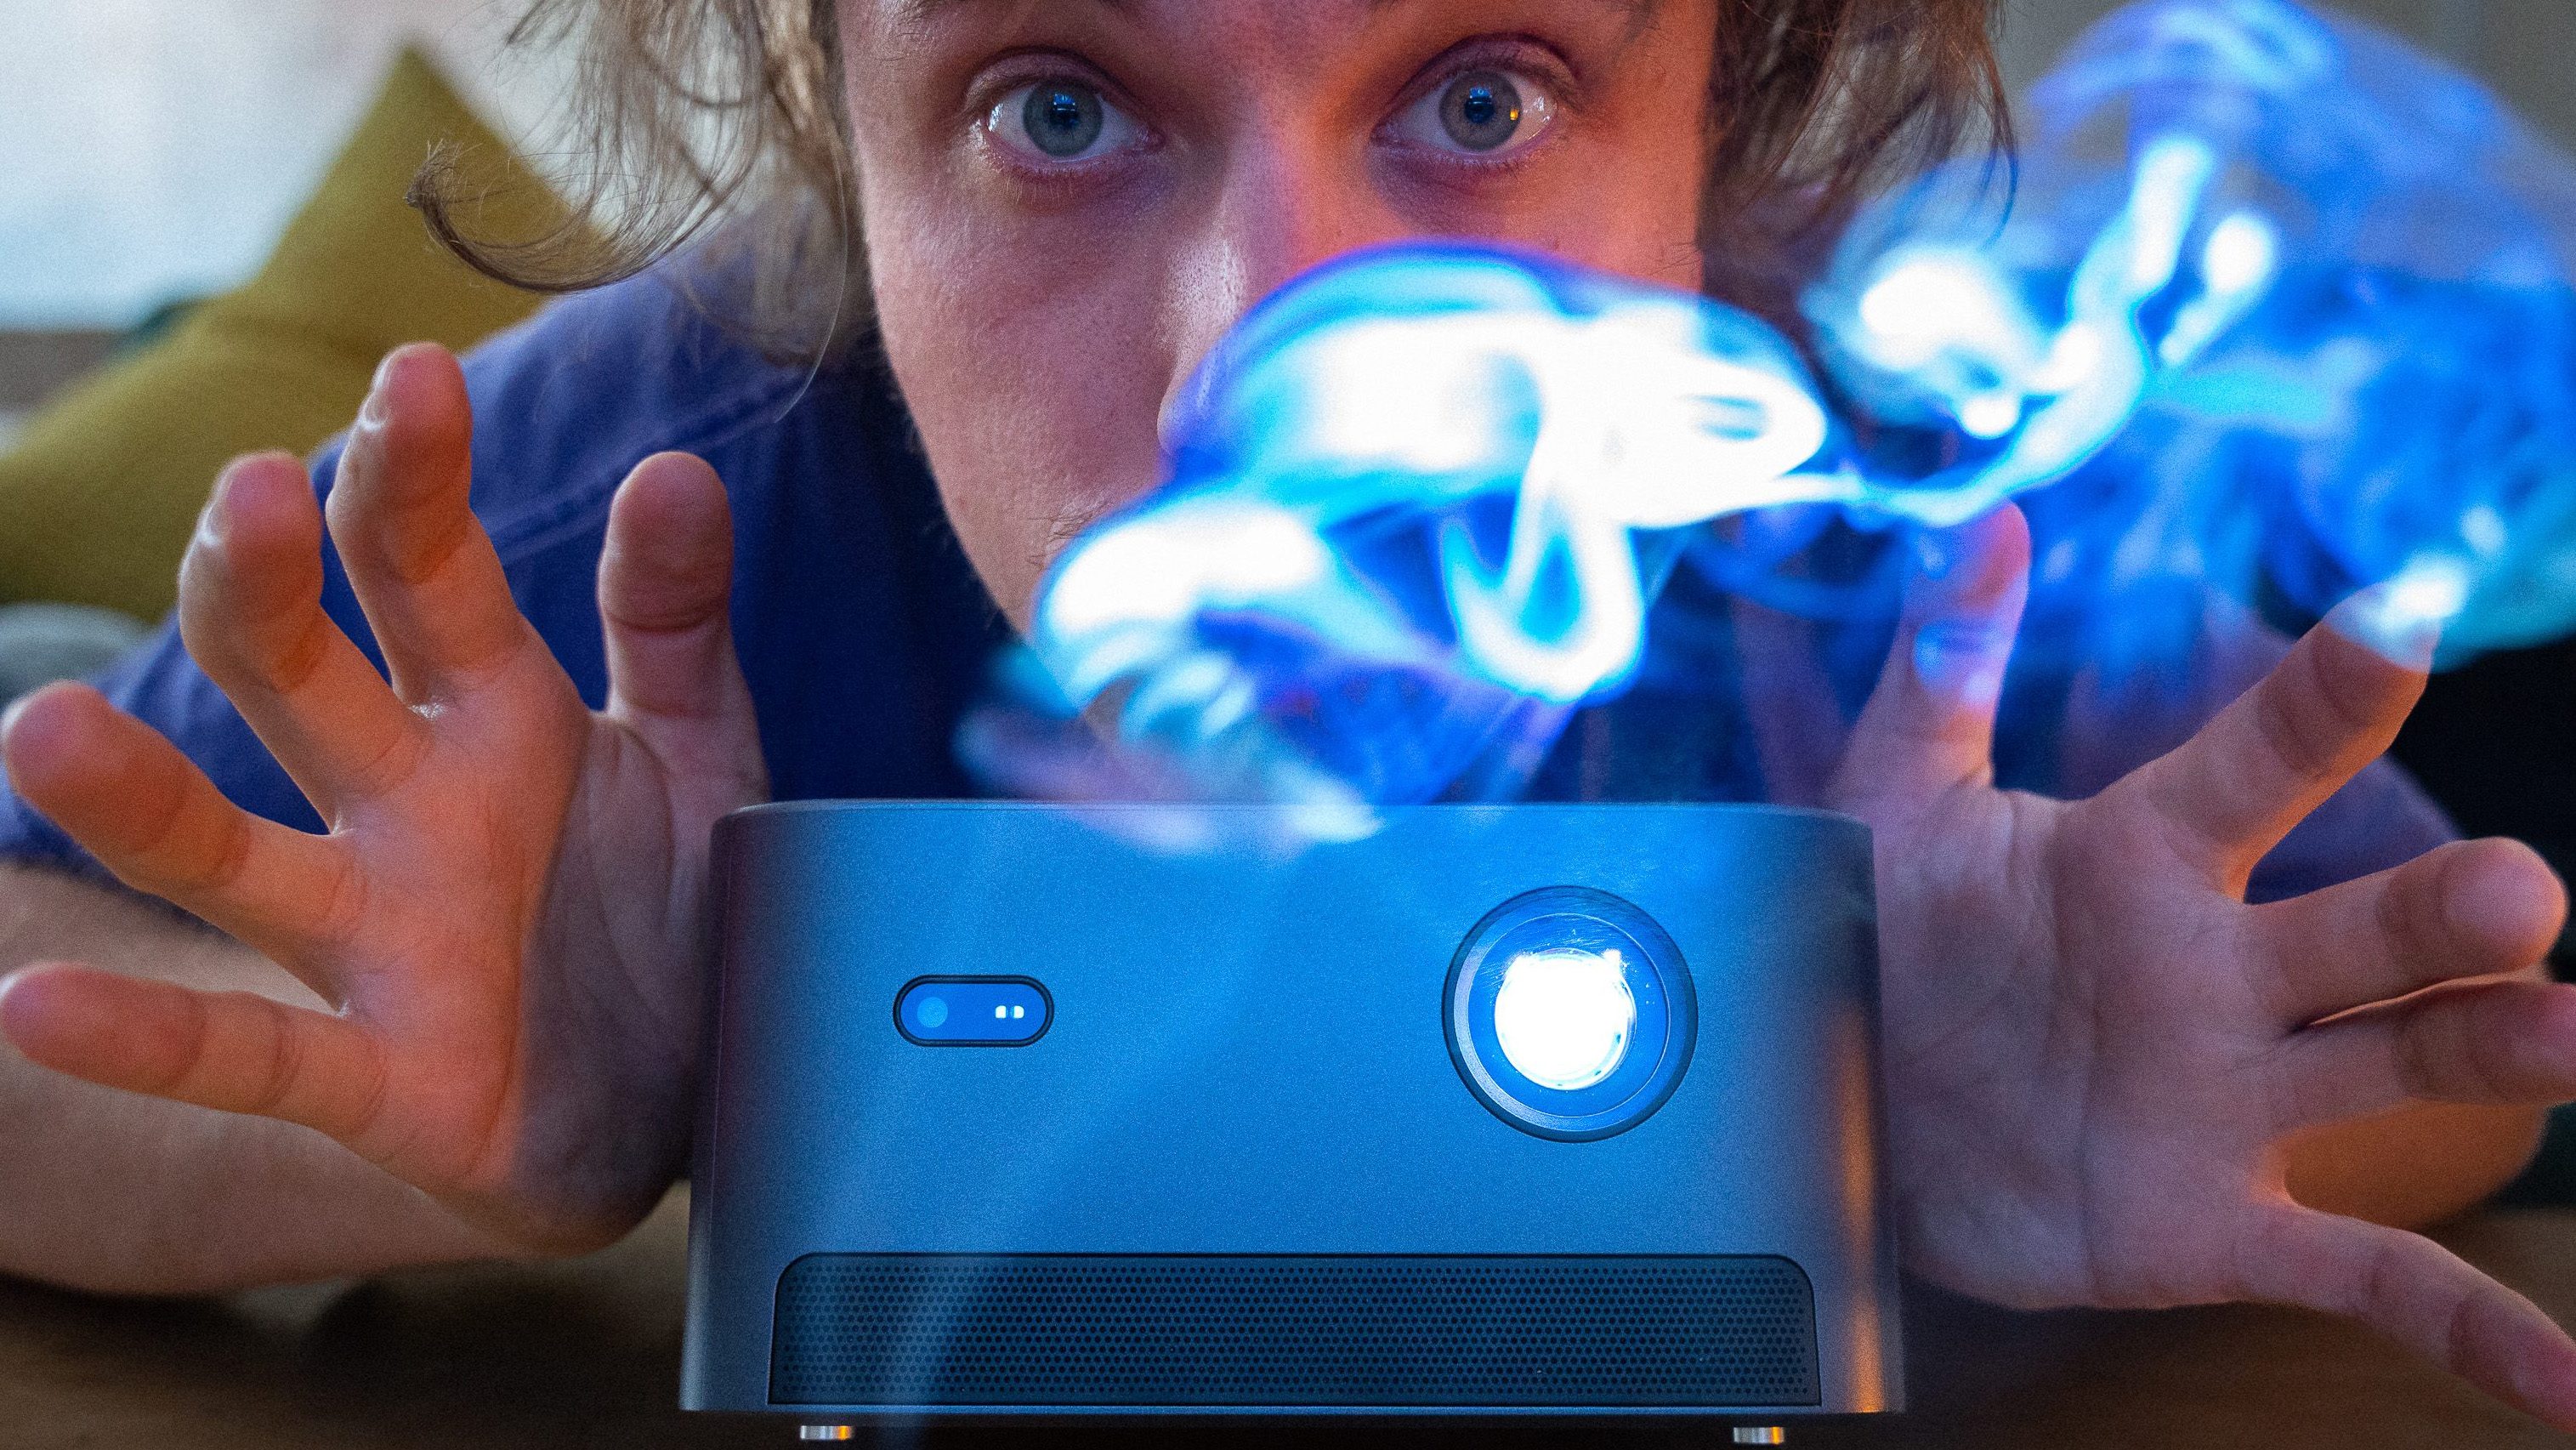 Anker Nebula Capsule 3 Laser hands-on review: pocketable projector -   Reviews